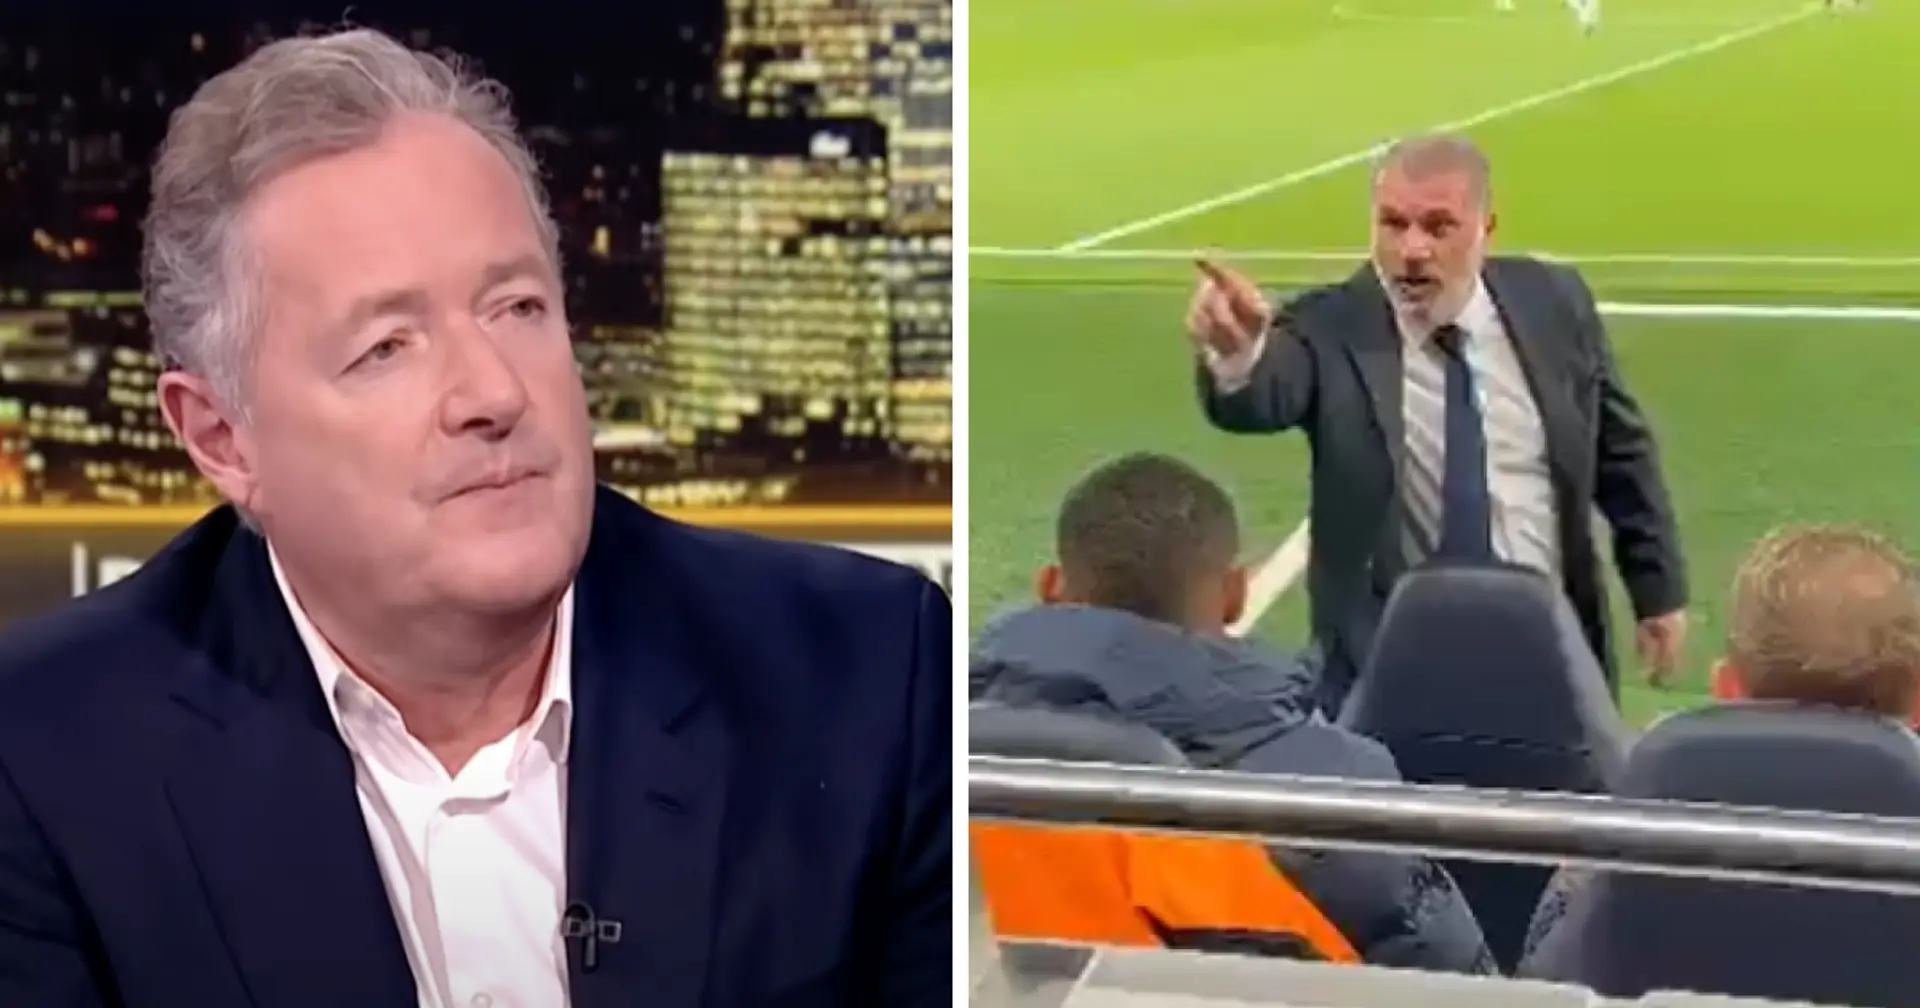 'I’m ashamed more than usual of Tottenham fans': Piers Morgan reacts to Postecoglou's confrontation with Spurs fan